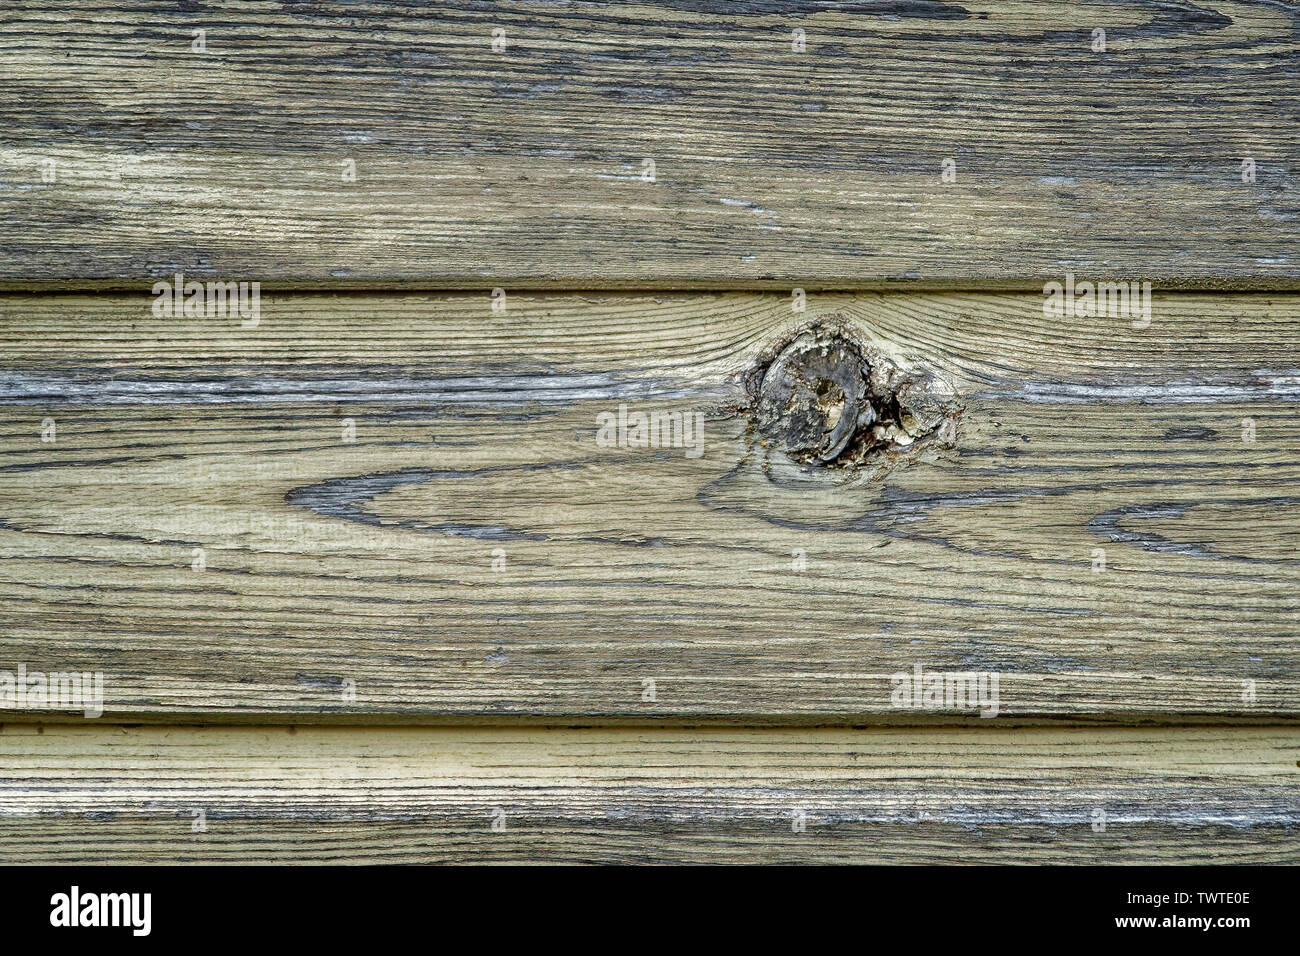 Semi-abstract horizontal, yellow-stained, wooden fence slats with single knot; landscape format. Stock Photo